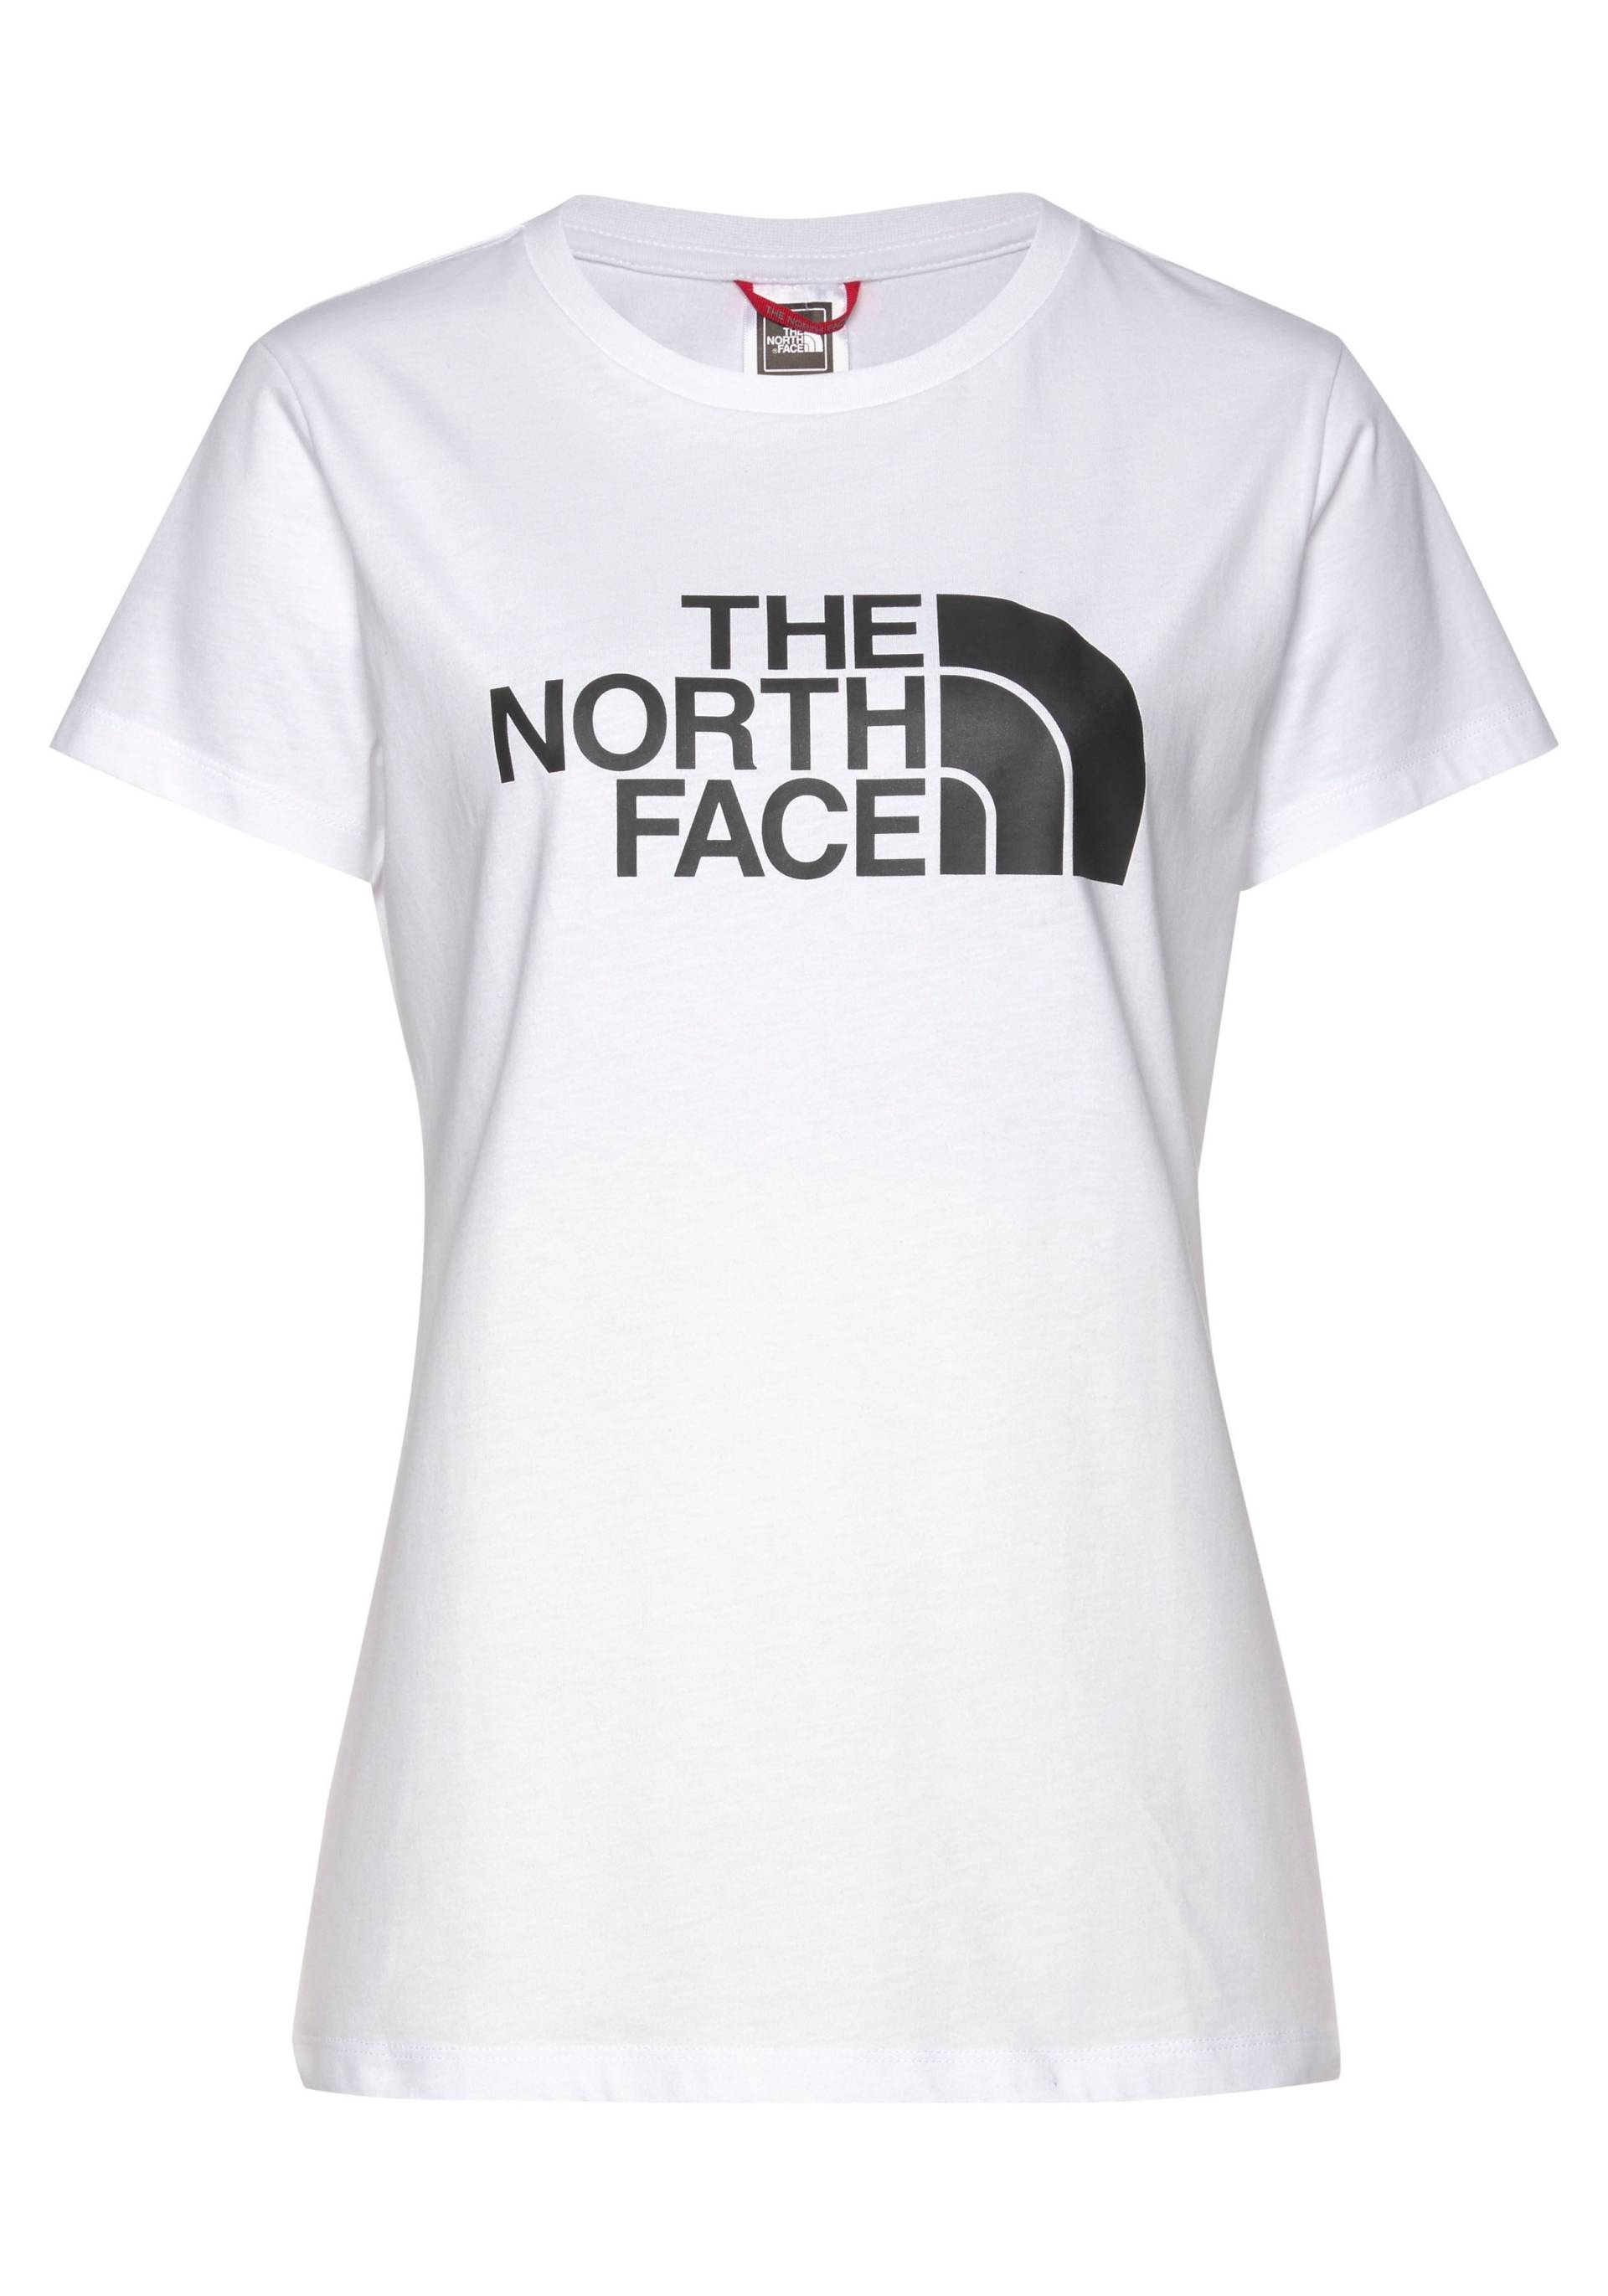 The North Face T-Shirt von The North Face